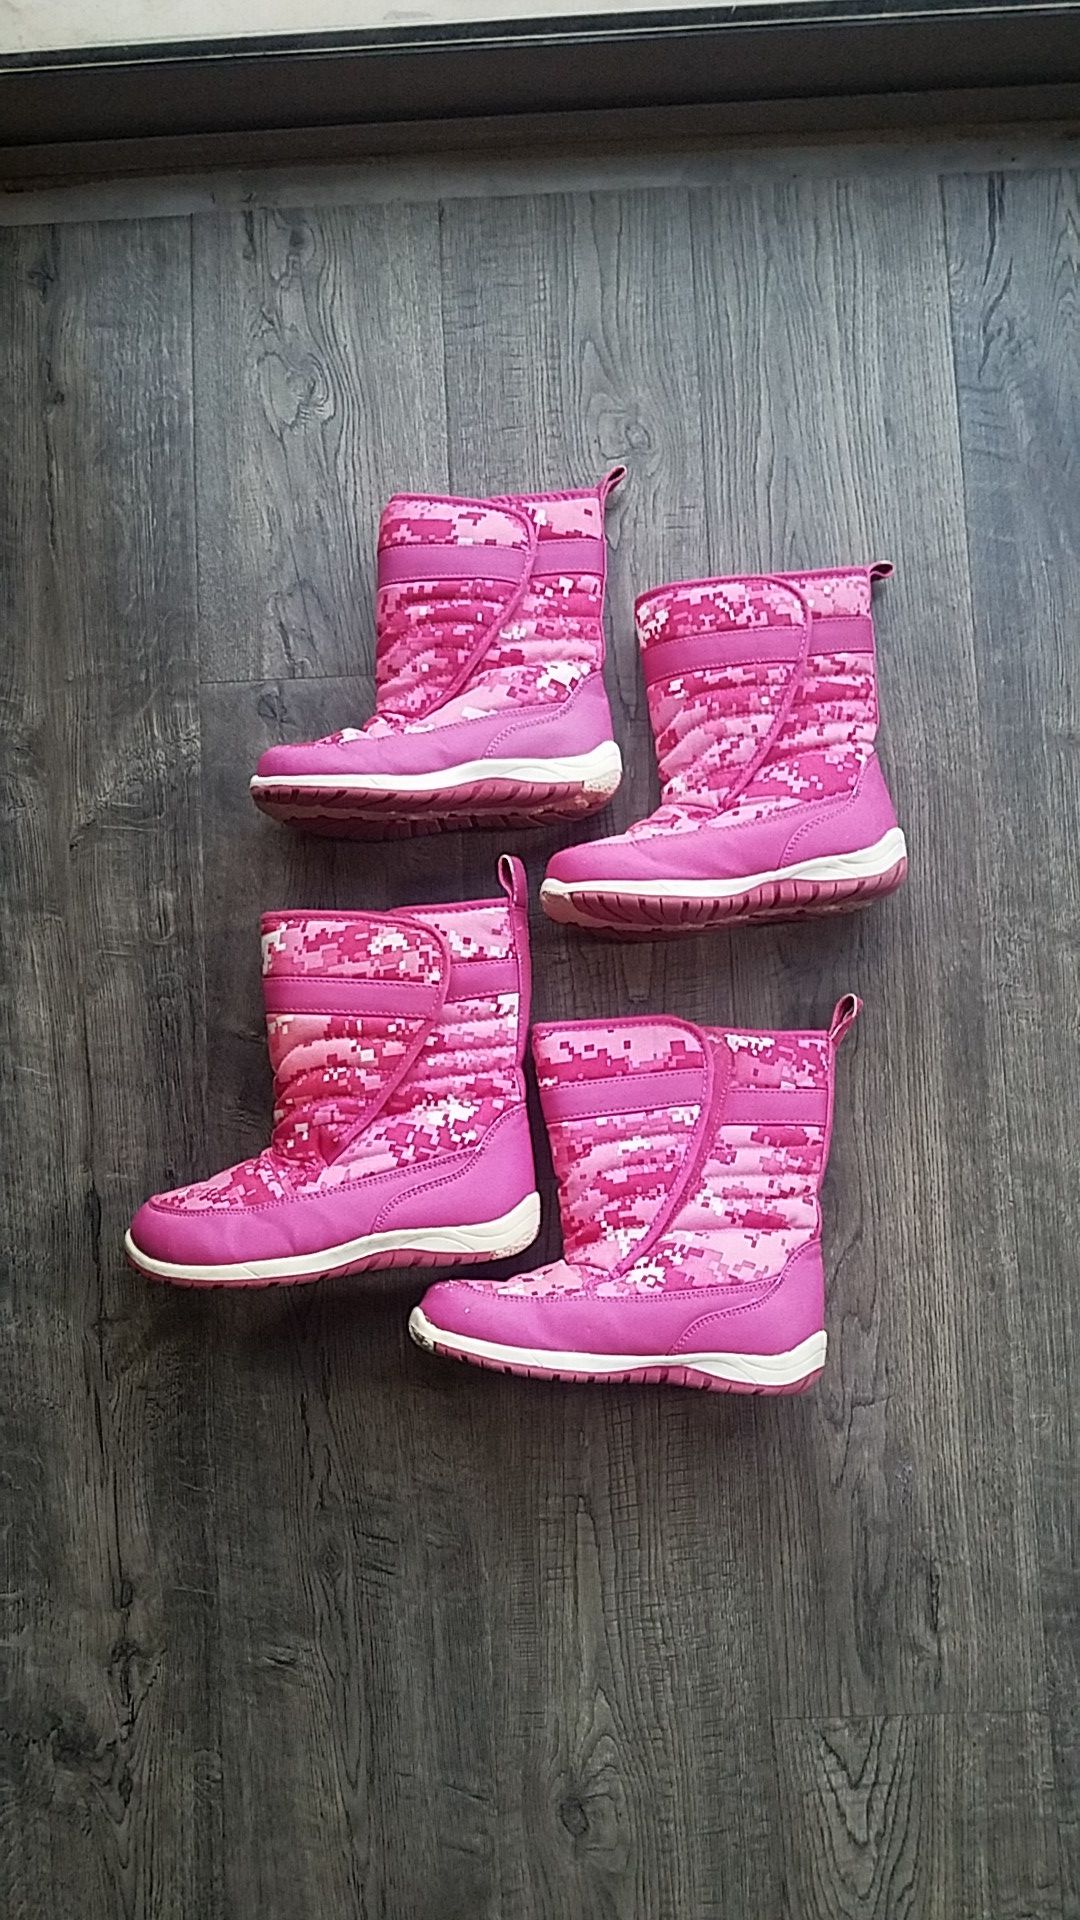 Girls Snow Boots Size 12